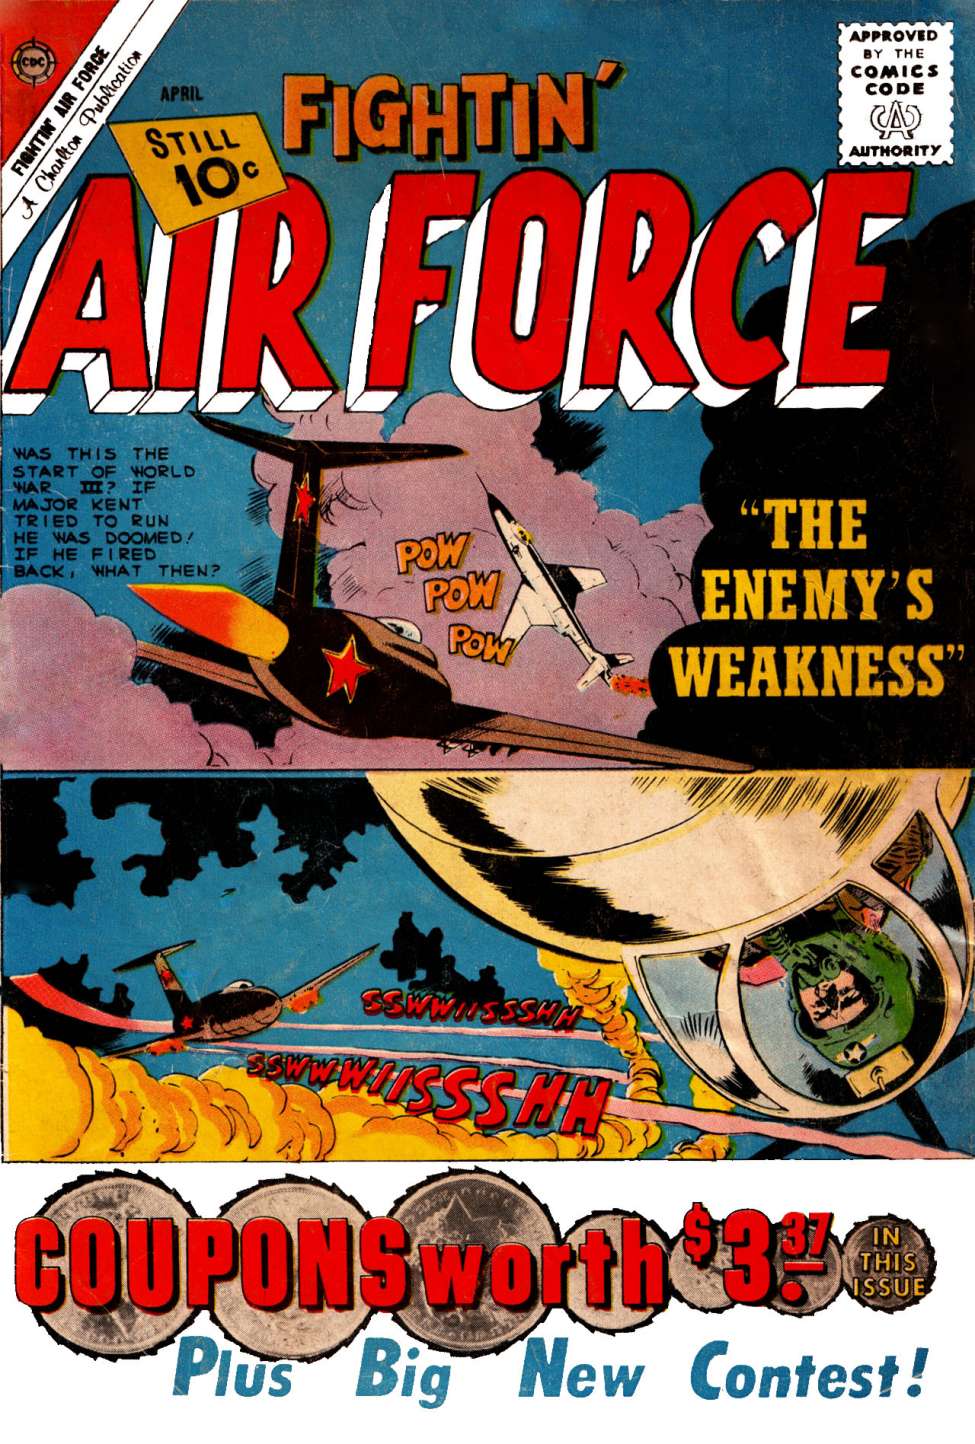 Book Cover For Fightin' Air Force 26